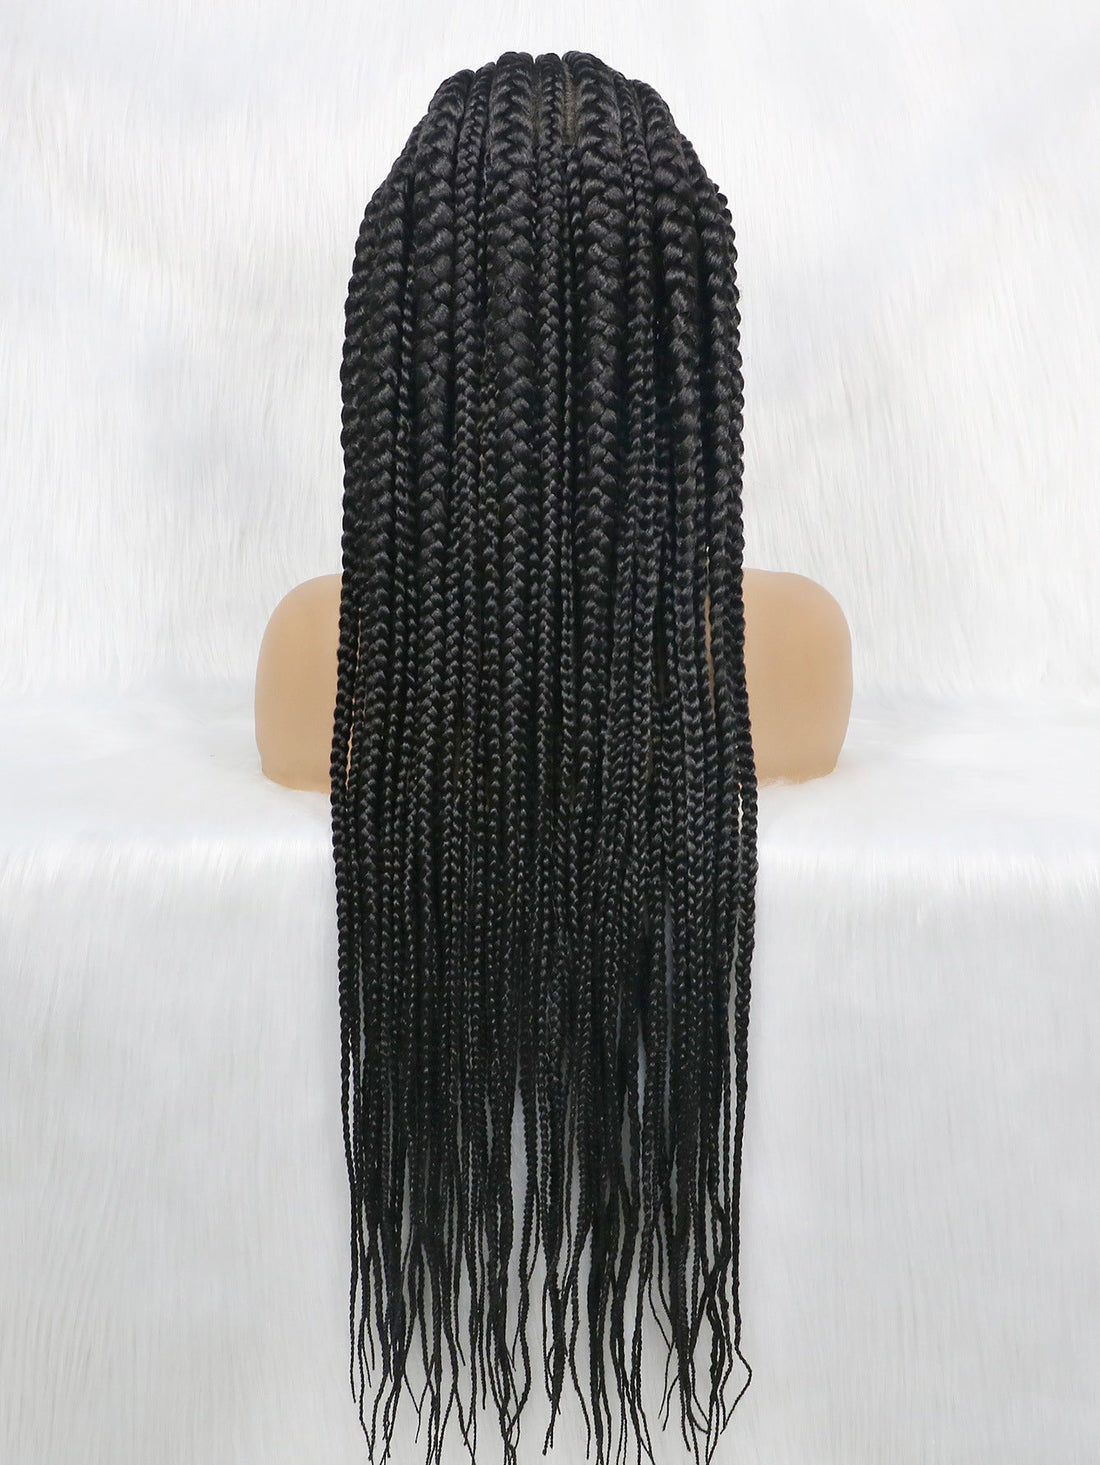 38 Inch 100% Hand-Braided LACE Braided Wigs